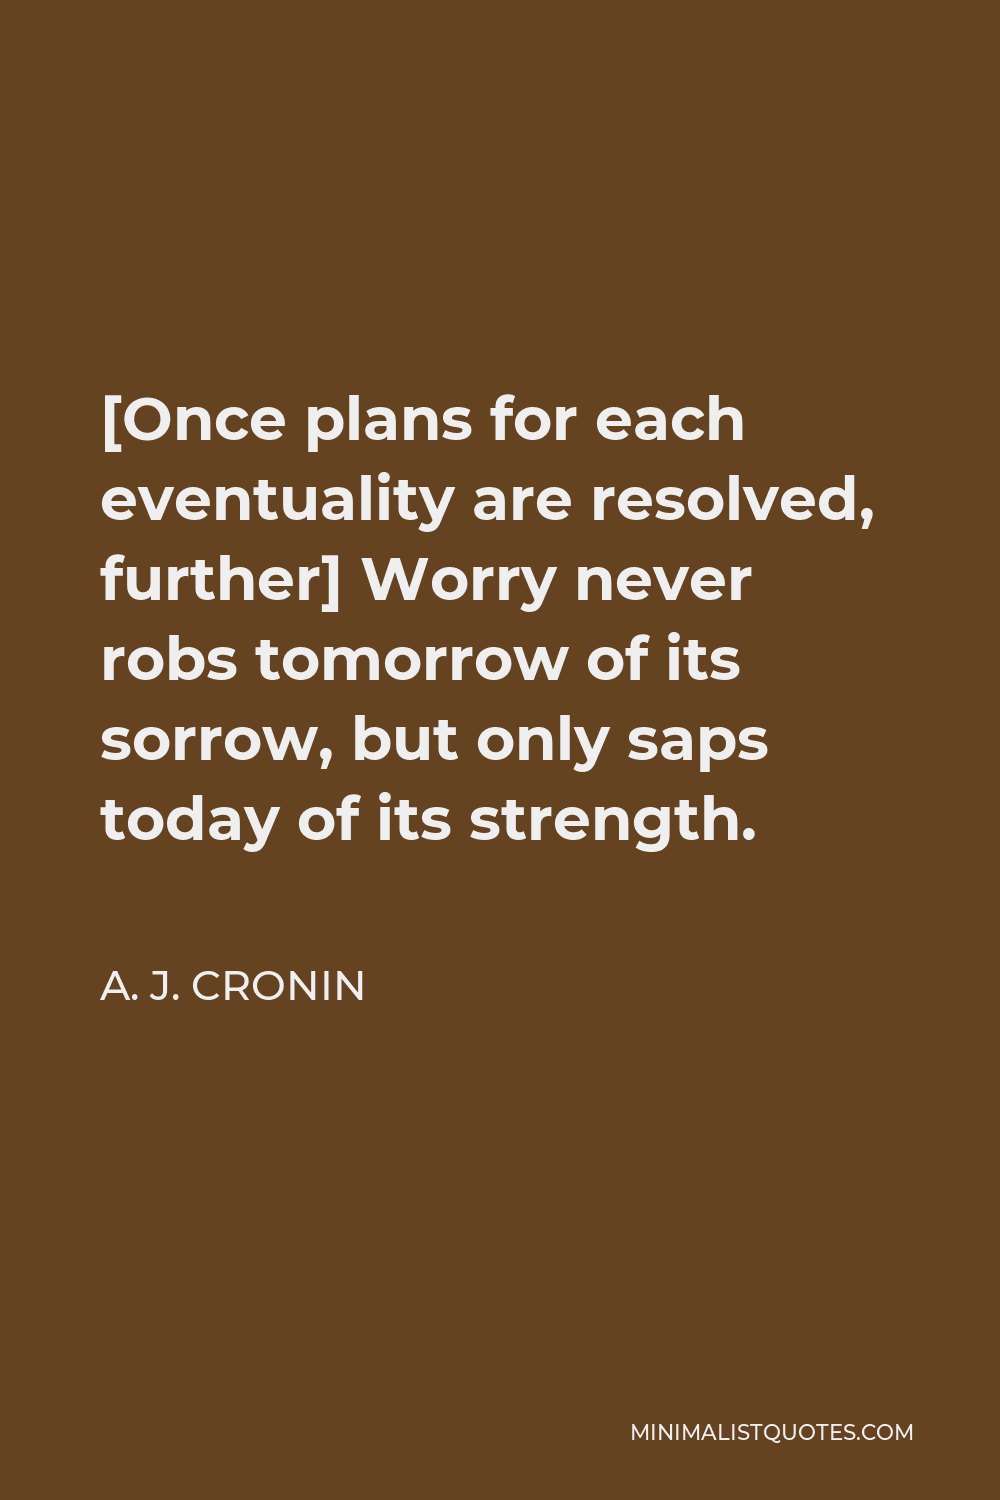 A. J. Cronin Quote - [Once plans for each eventuality are resolved, further] Worry never robs tomorrow of its sorrow, but only saps today of its strength.